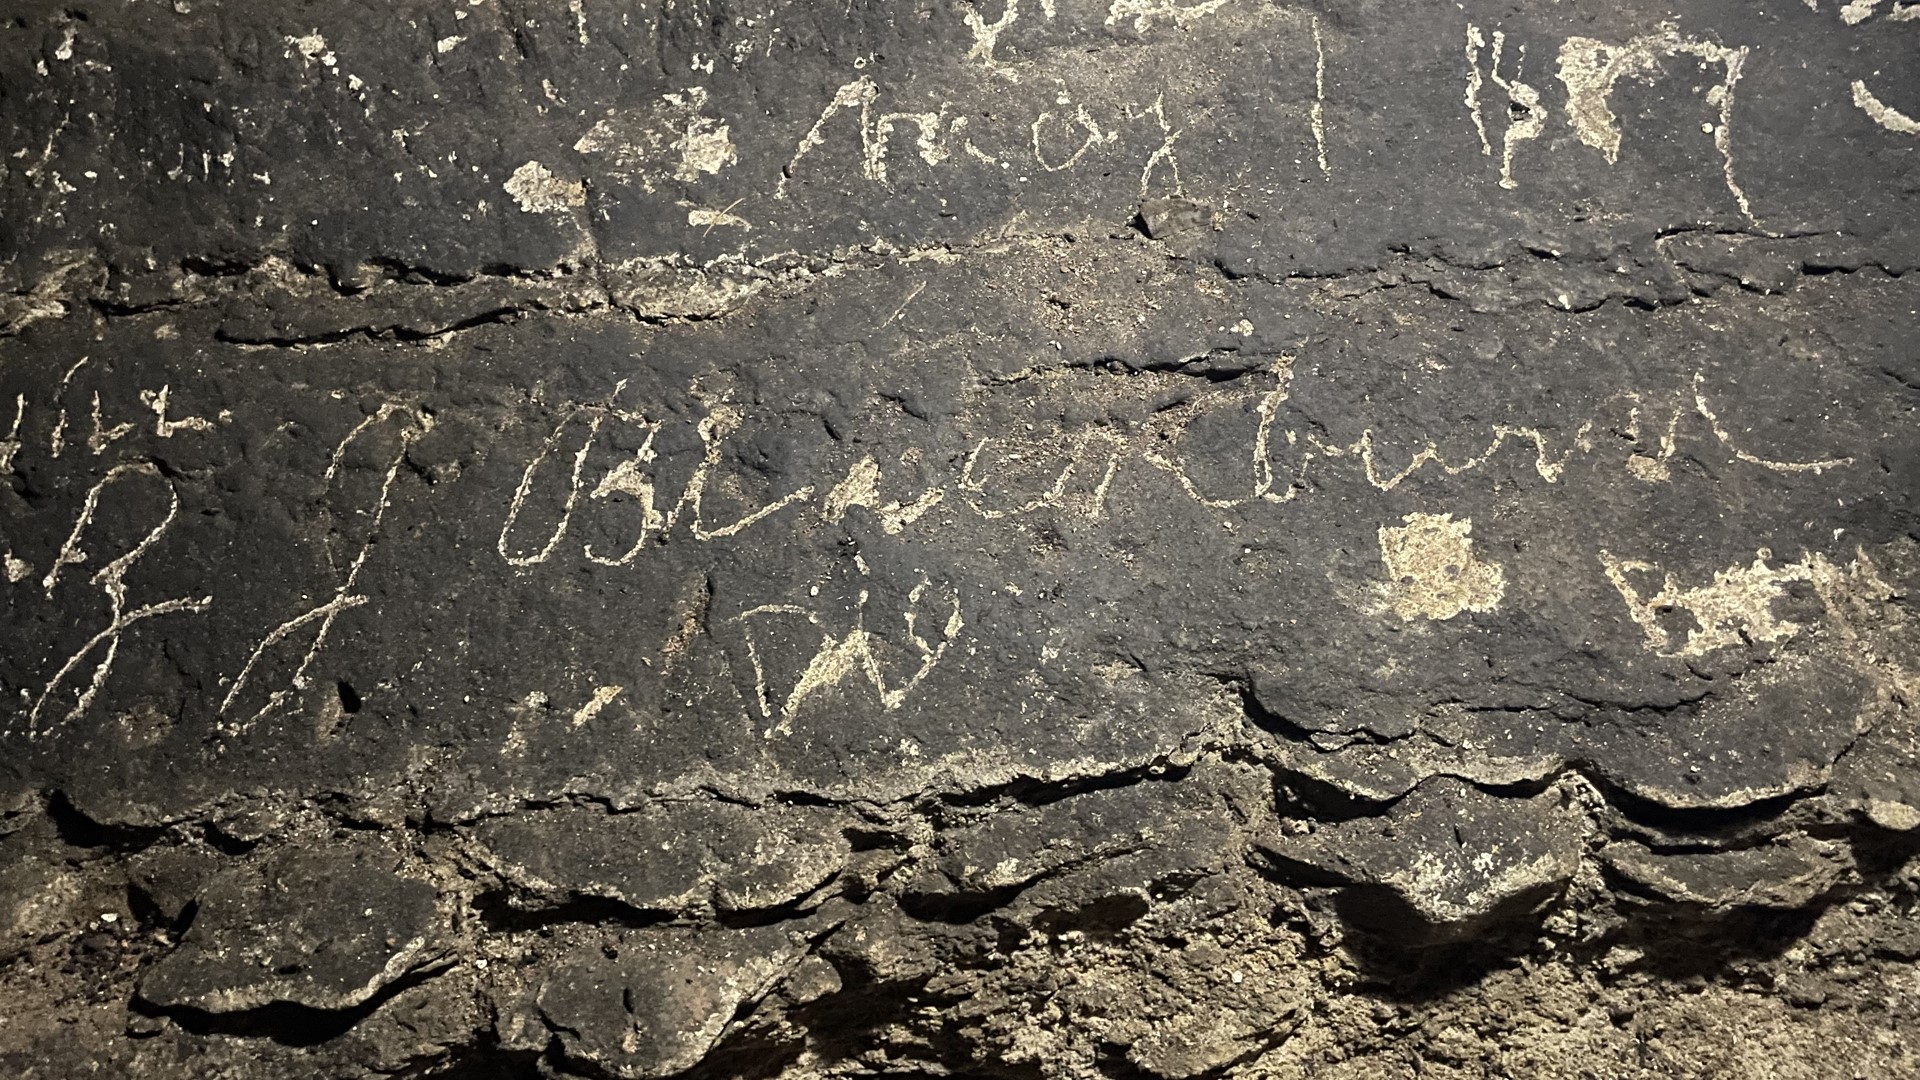 War Eagle Cavern announced that while working on an expansion project employees uncovered a historic carving. They tell 5 news it's from Zemri Jackson Blackburn.